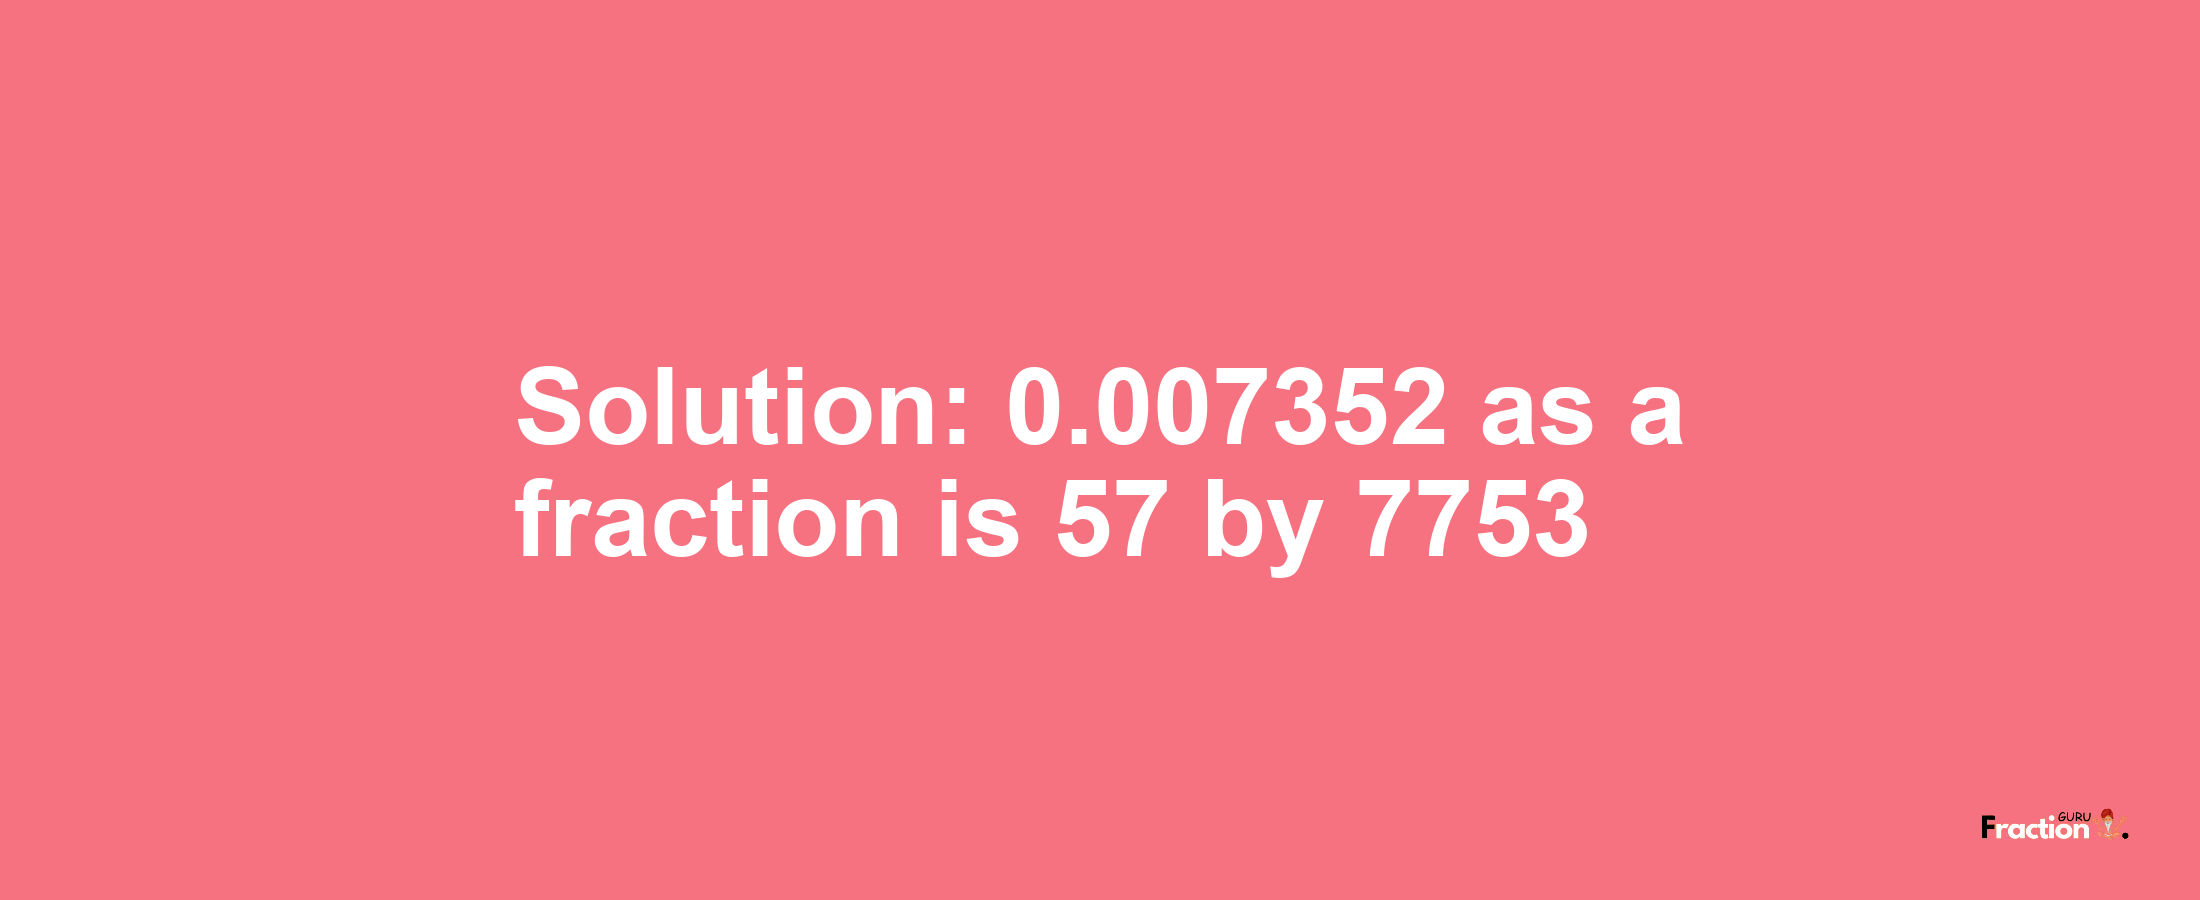 Solution:0.007352 as a fraction is 57/7753